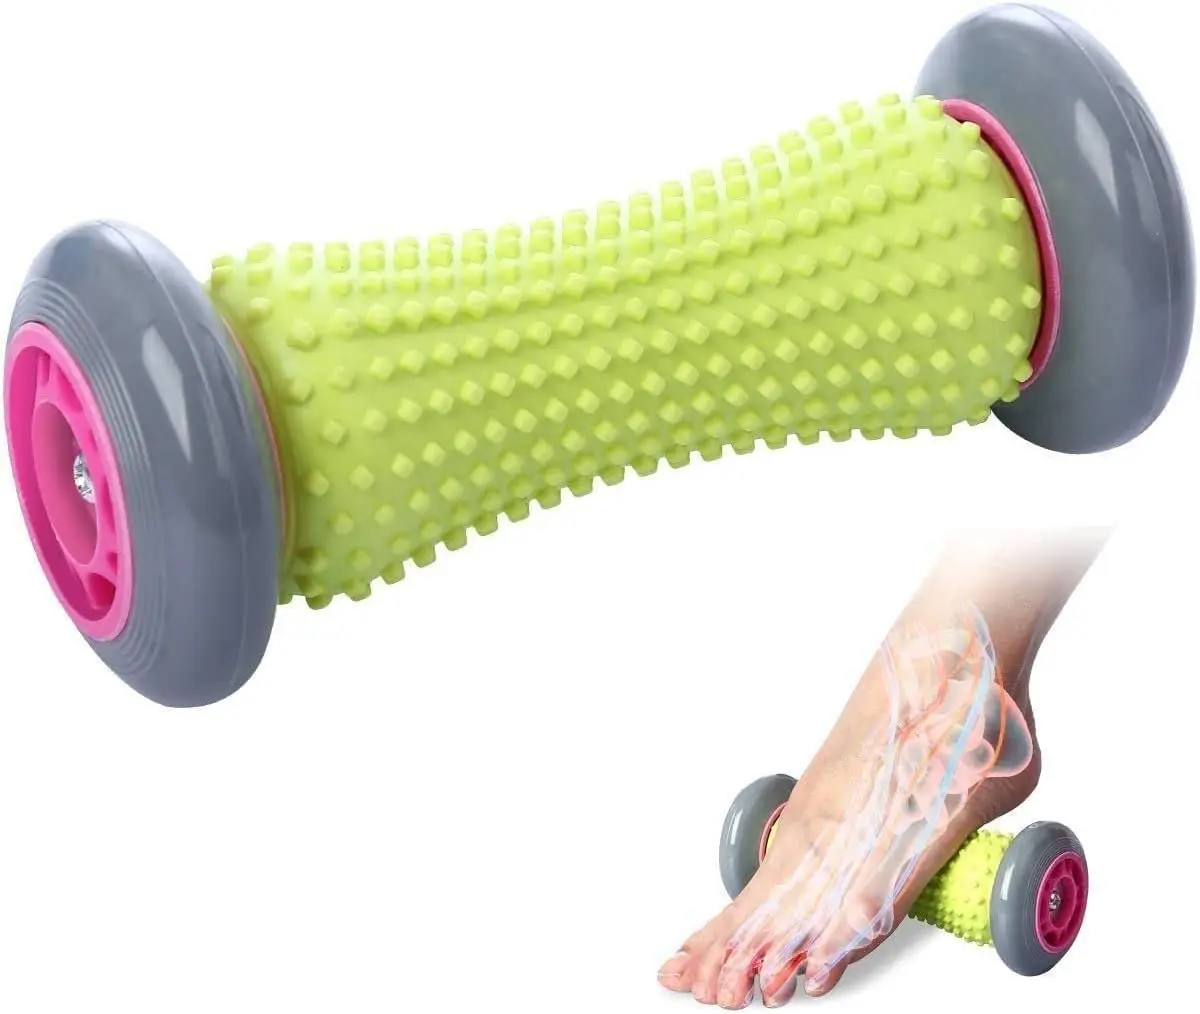 

2023 Tiktok Hot Sale Trigger Point Therapy Foot Massager Roller Massage Tool For Muscle Pain Relief Foot Massager